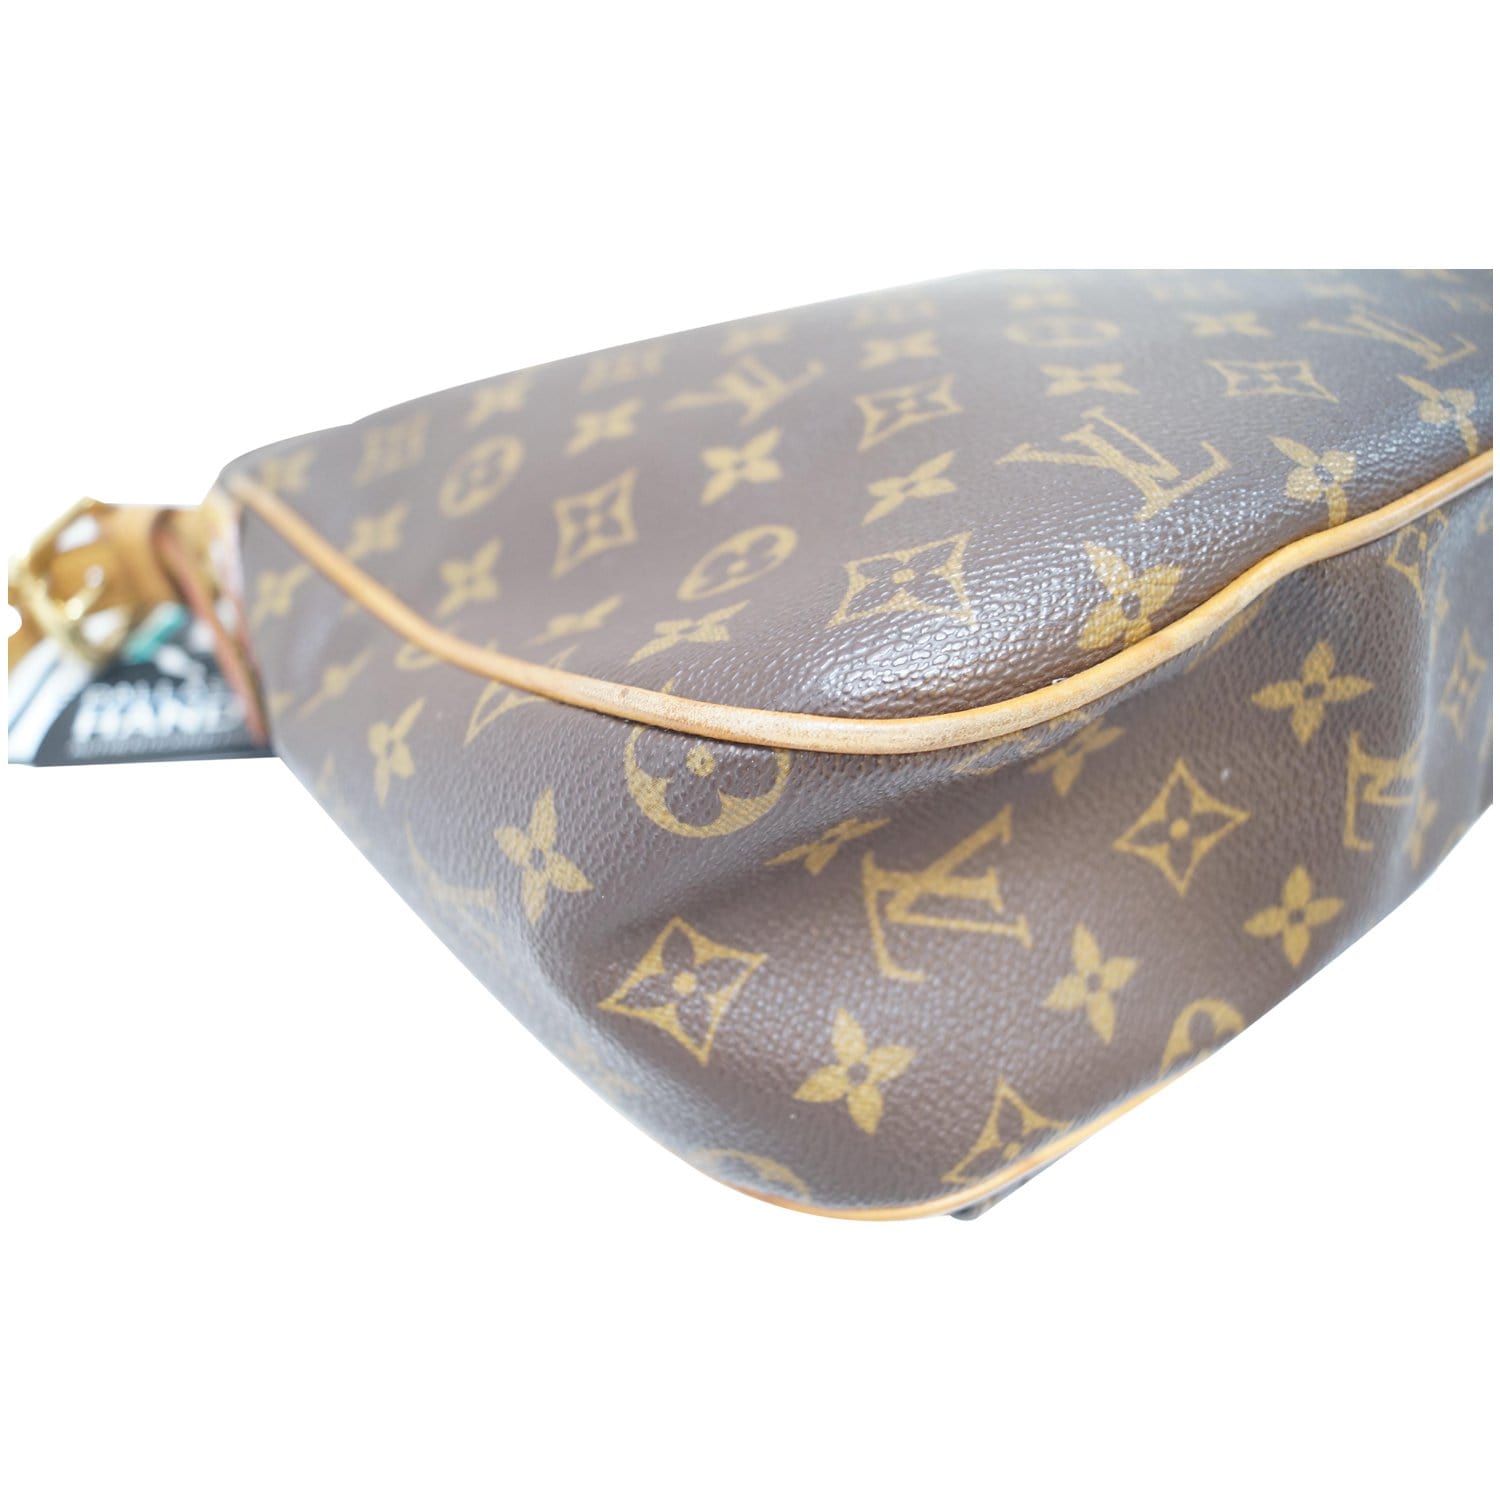 Monogram Canvas Hudson GM (Authentic Pre-Owned)